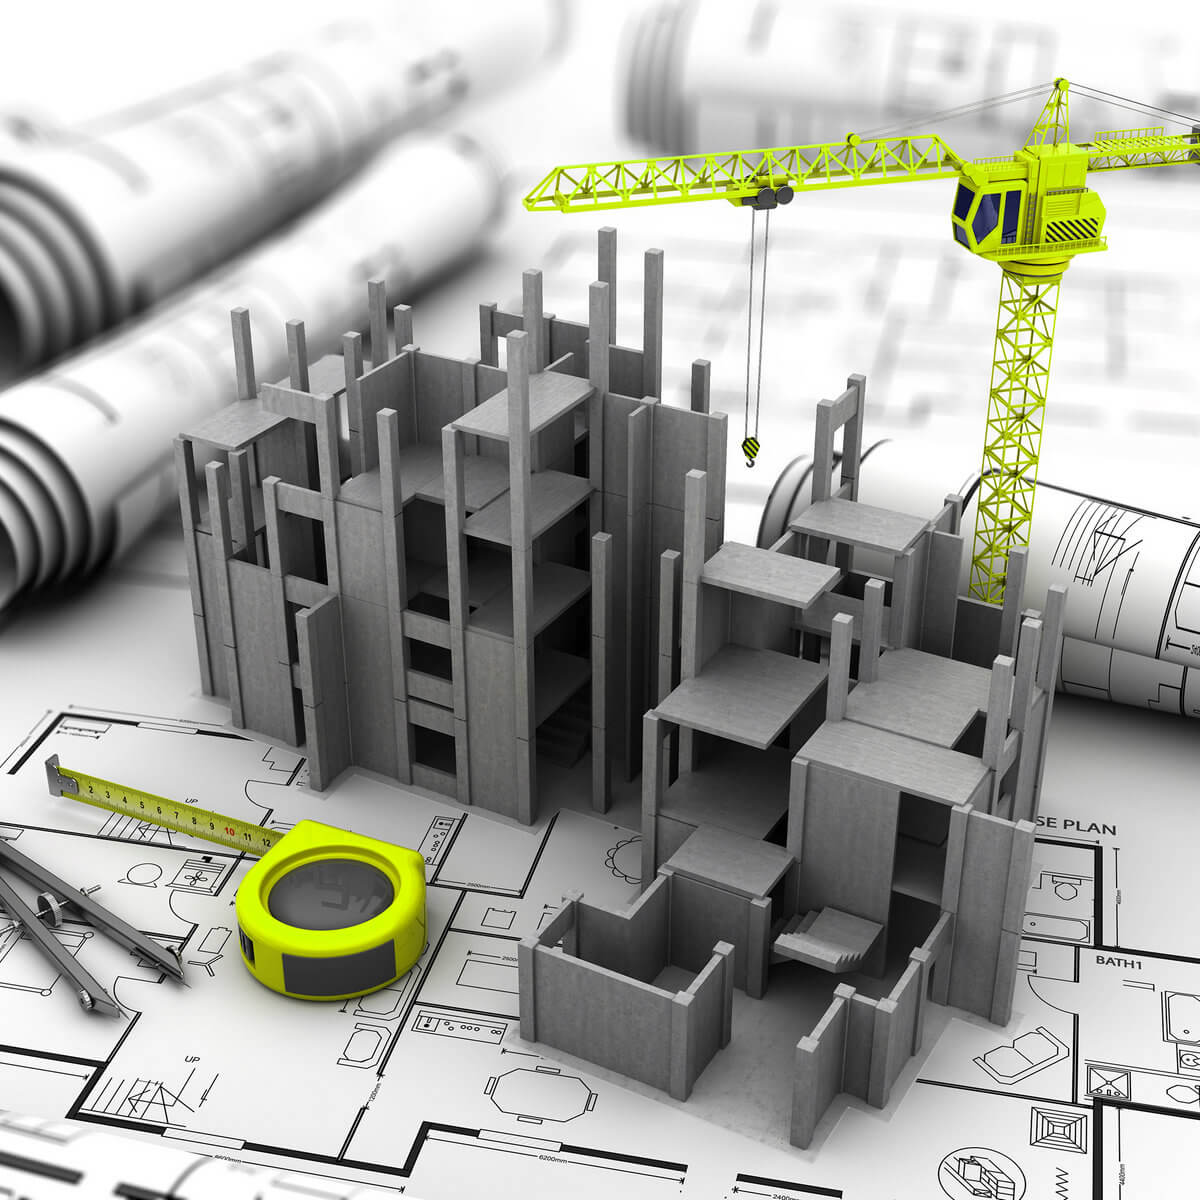 BIM for construction and collaboration purposes